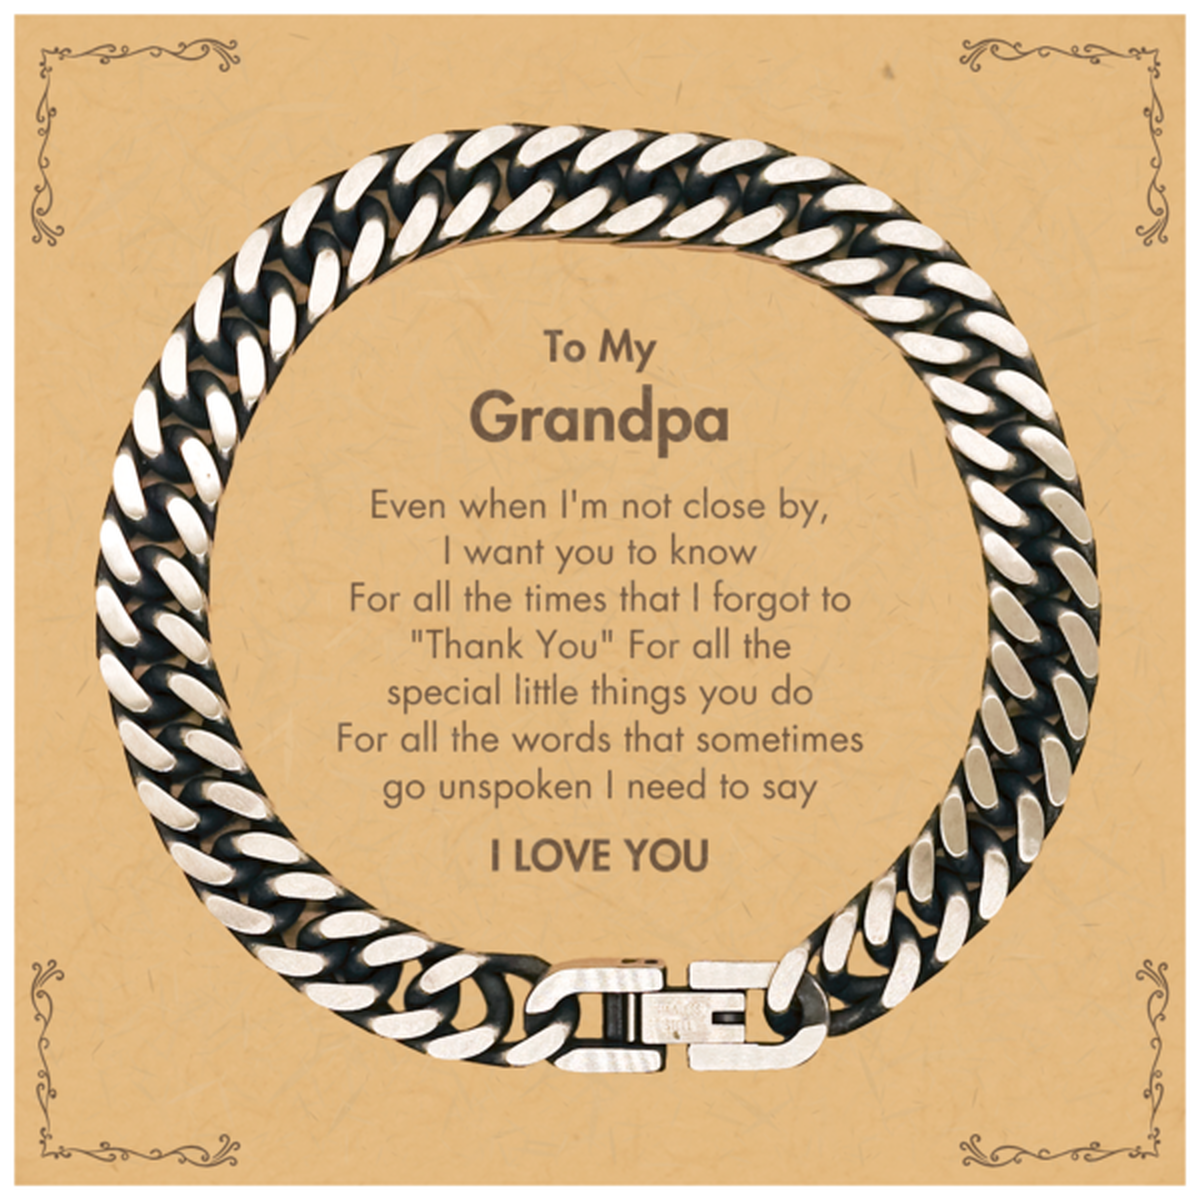 Thank You Gifts for Grandpa, Keepsake Cuban Link Chain Bracelet Gifts for Grandpa Birthday Mother's day Father's Day Grandpa For all the words That sometimes go unspoken I need to say I LOVE YOU